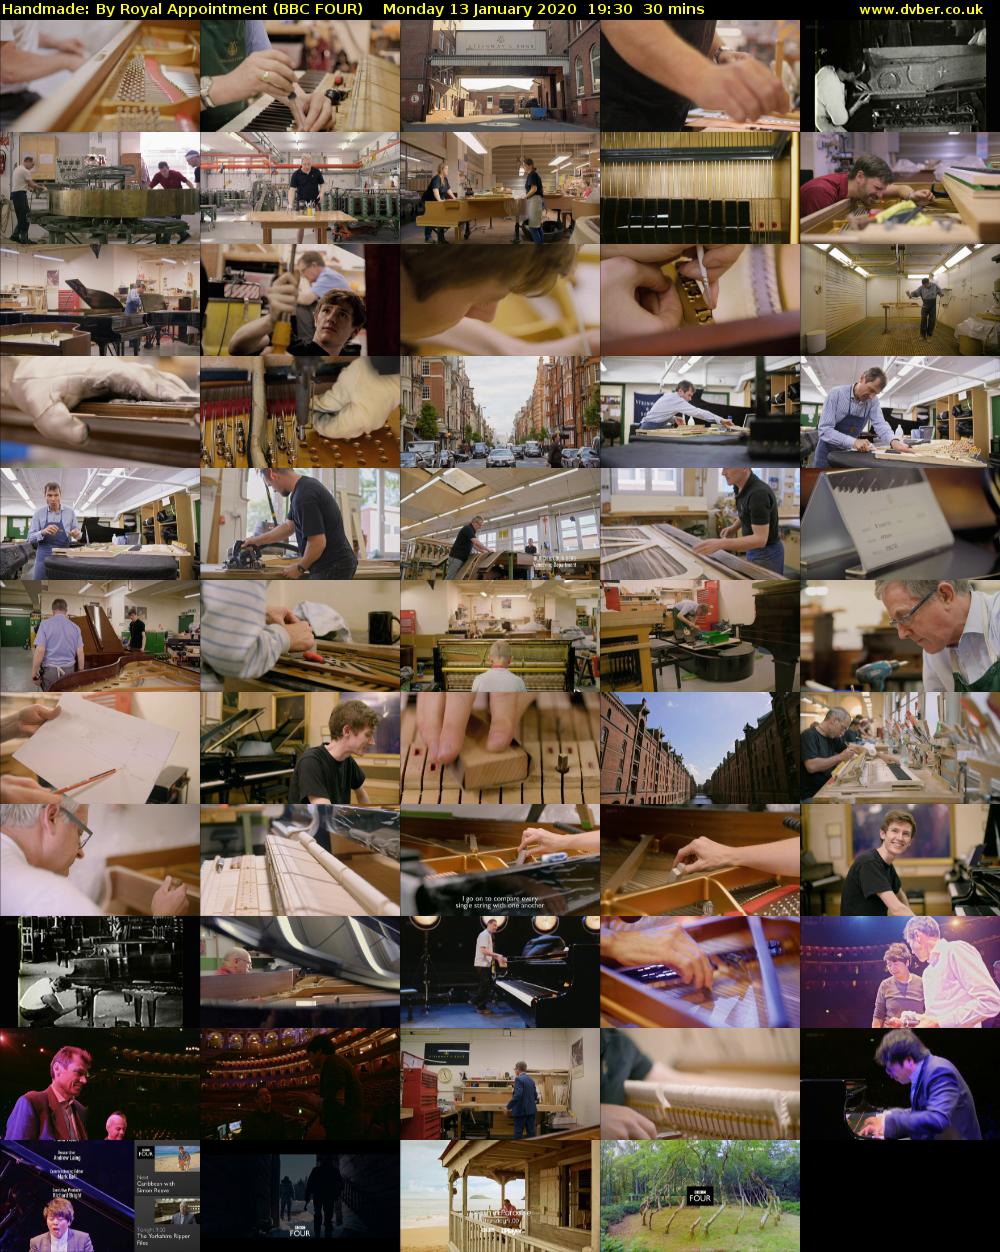 Handmade: By Royal Appointment (BBC FOUR) Monday 13 January 2020 19:30 - 20:00